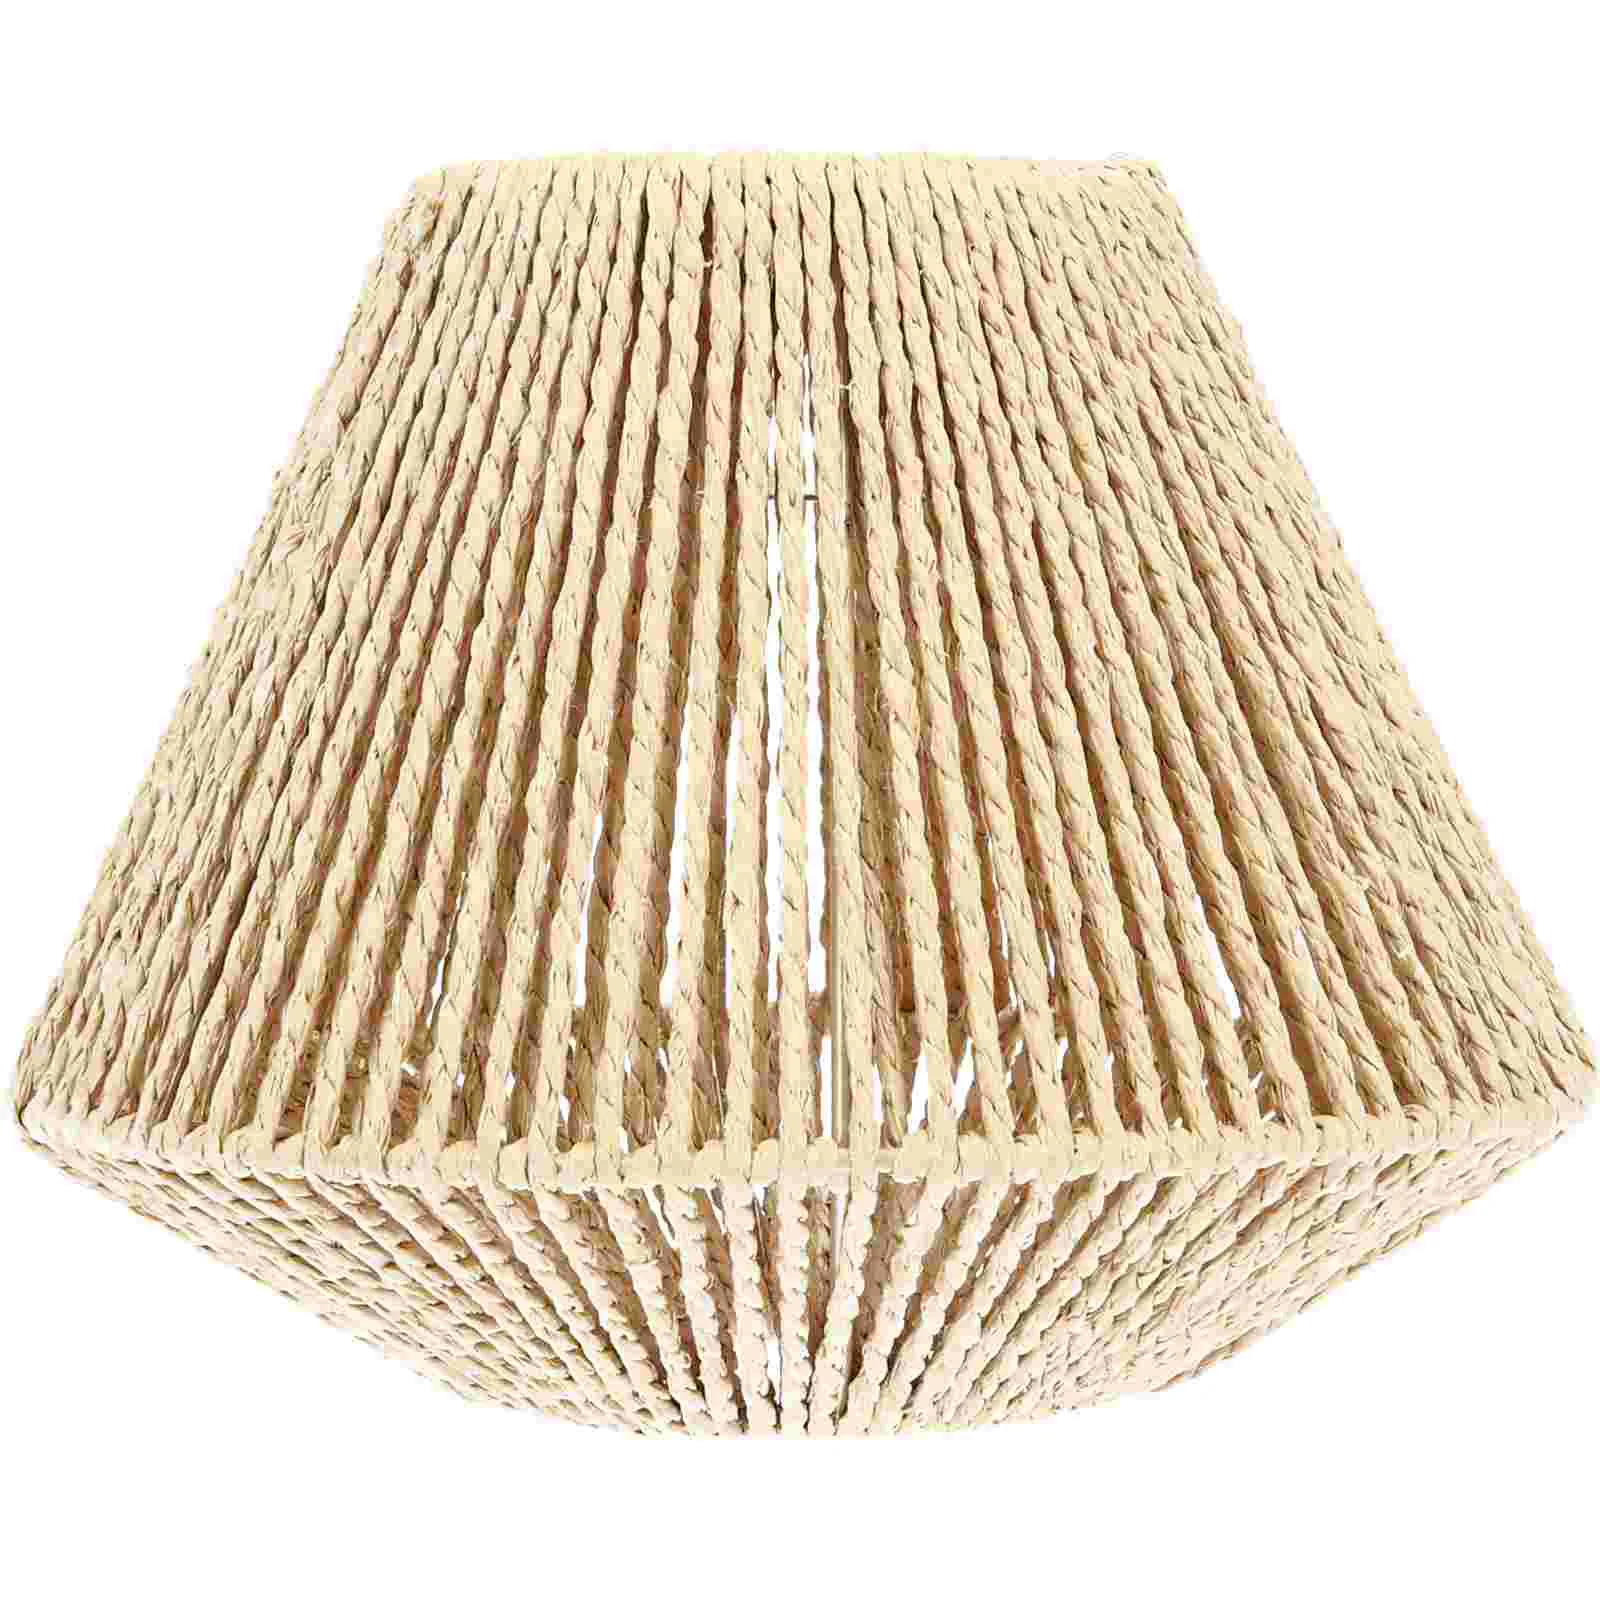 Rattan Lampshade Rustic Wall Sconces Retro Lampshades Chandelier Cover Straw - £18.09 GBP